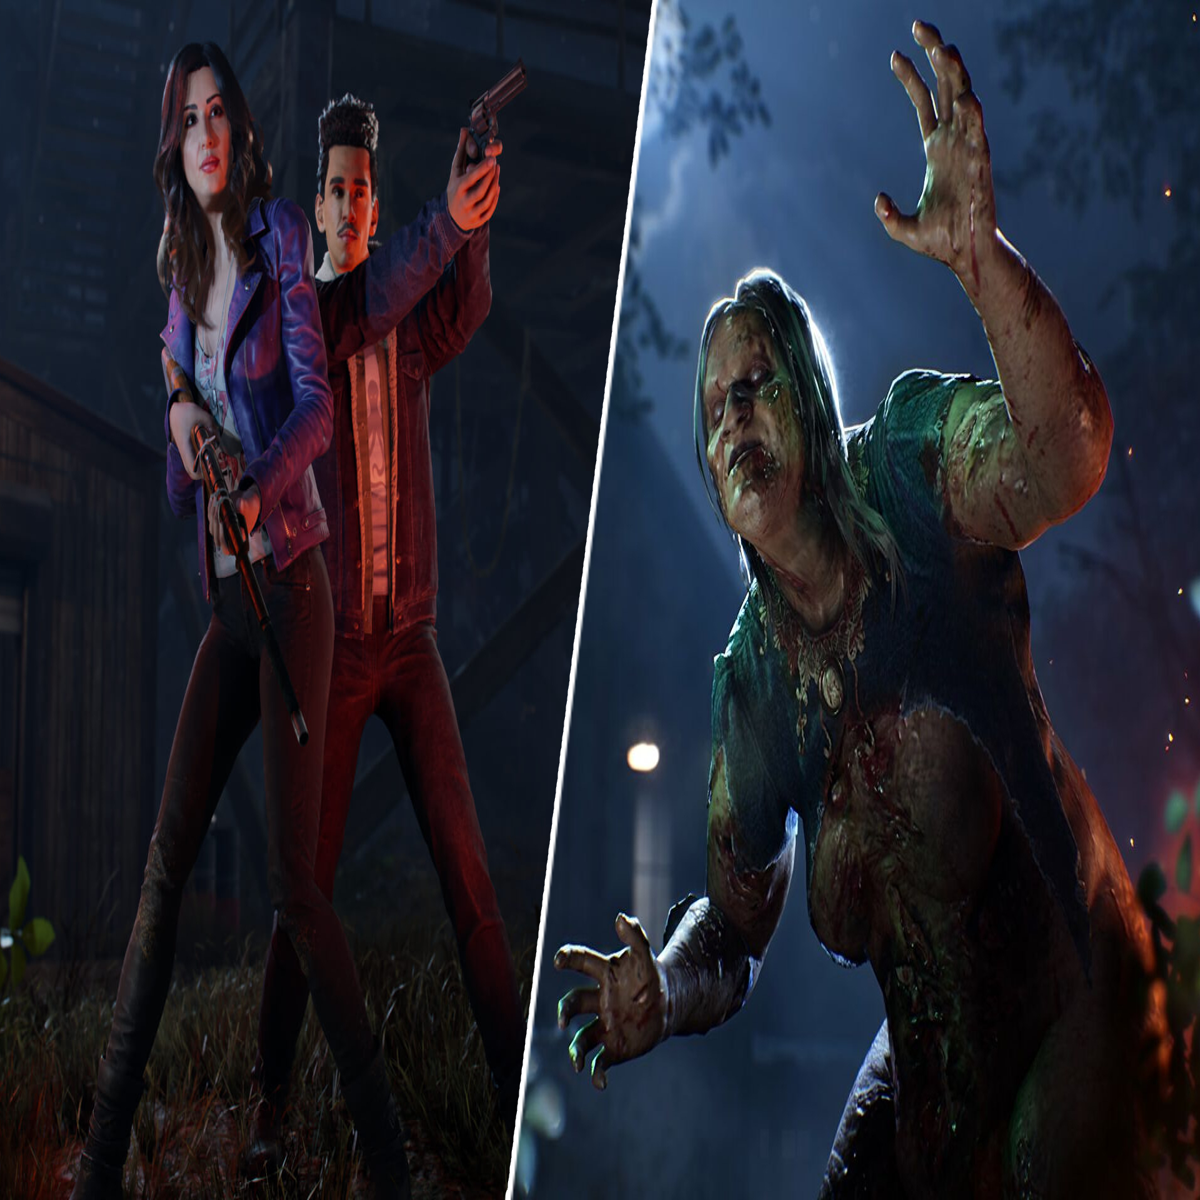 Evil Dead: The Game: The Review — Mega Dads